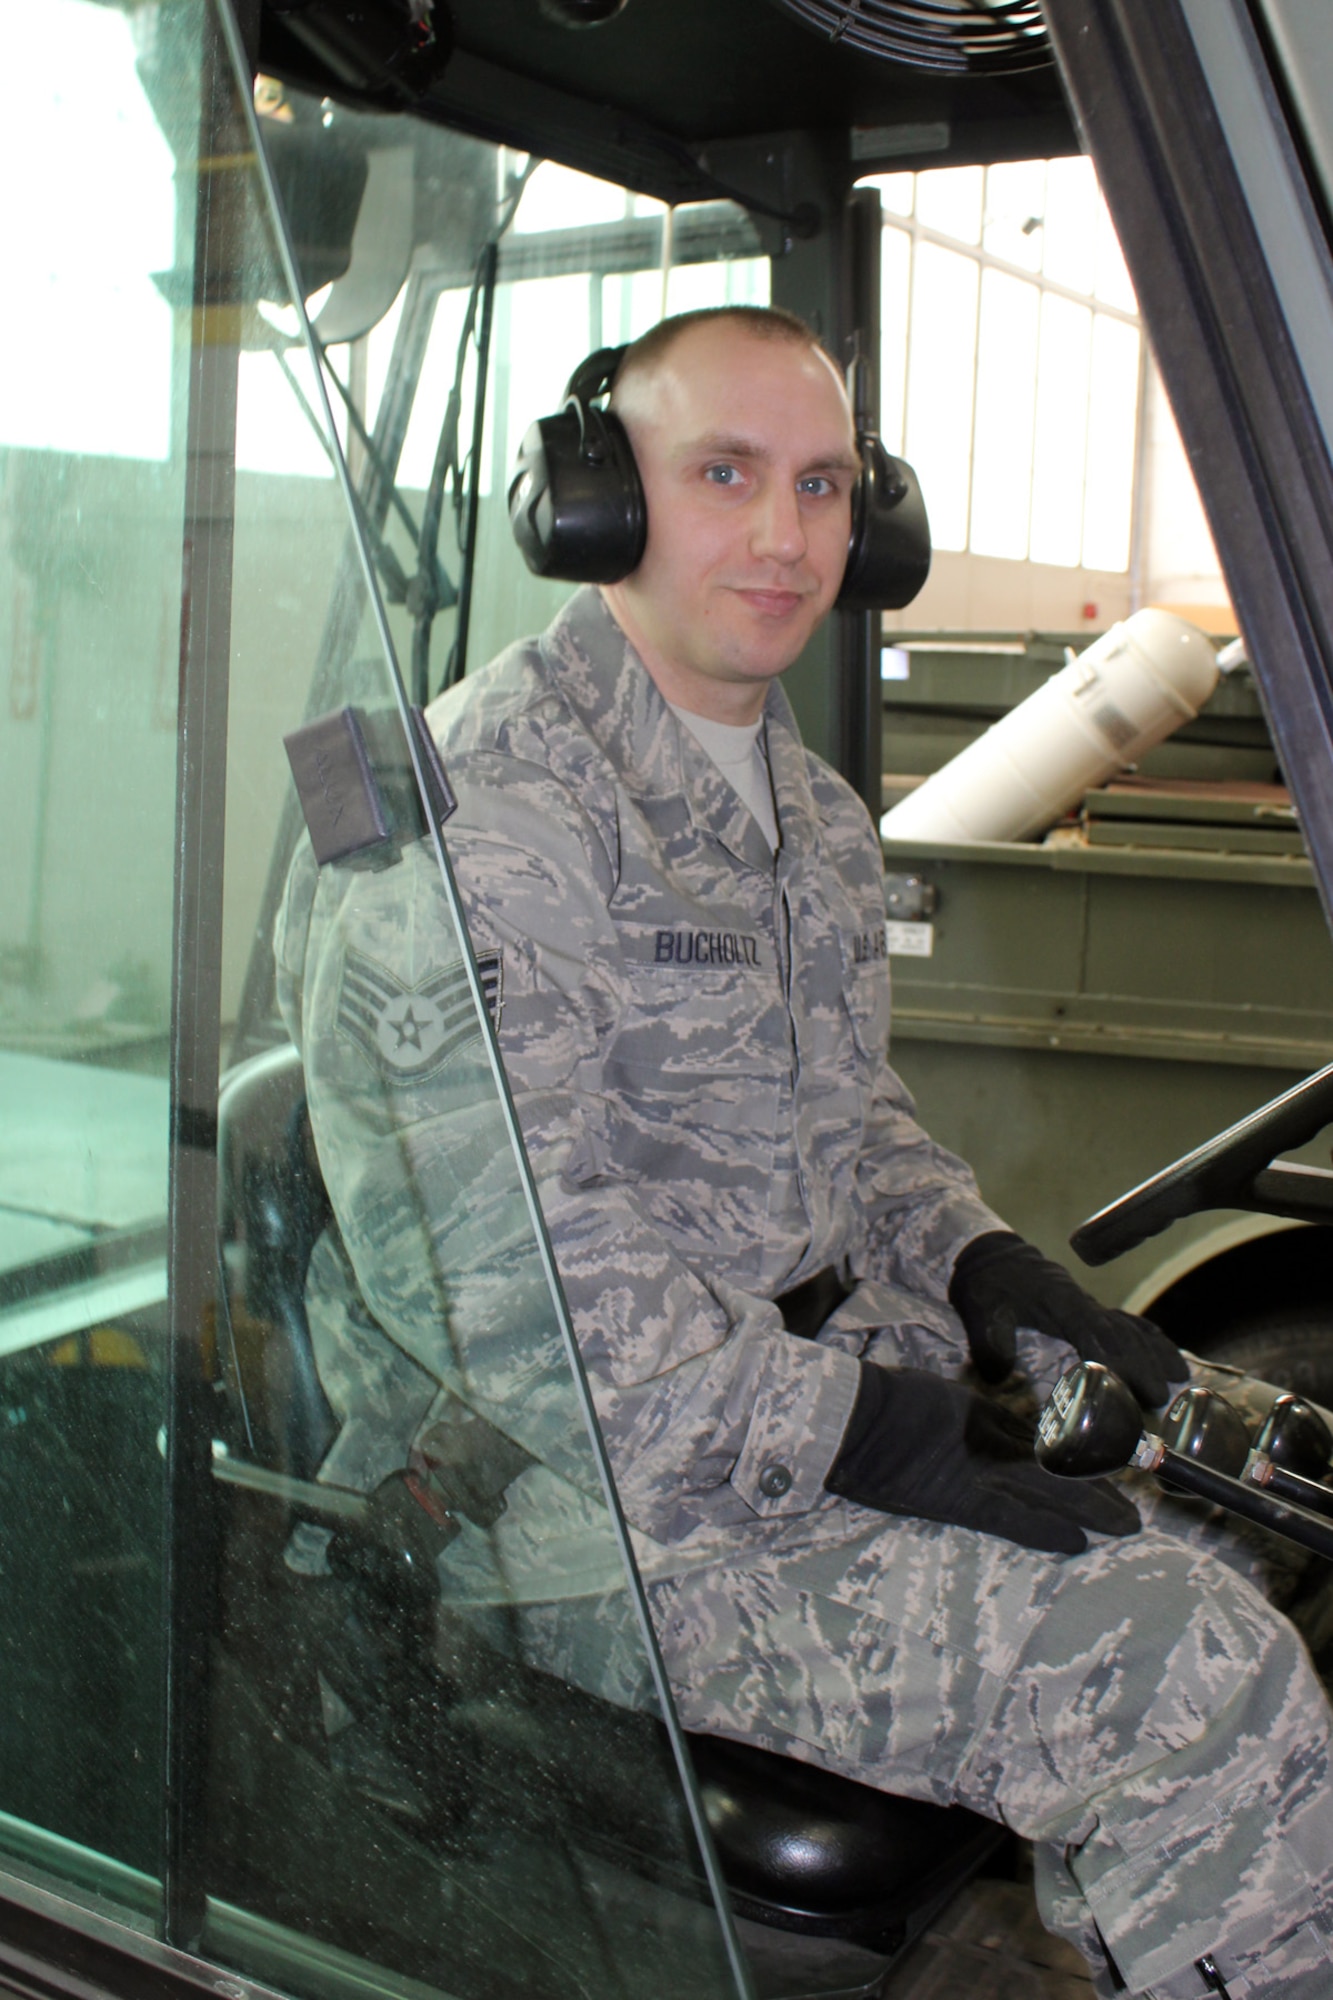 Staff Sgt. Jason Bucholtz, 127th Logistics Readiness Squadron, wears a seat belt and hearing protection as he prepares to use a 10K forklift to move a pallet of cargo at Selfridge Air National Guard Base, Mich., Feb. 9, 2013. As a member of the Aerial Port at the base, Bucholtz is charged with the safe and efficient movement of cargo and personnel on military aircraft. (Air National Guard photo by TSgt. Dan Heaton)